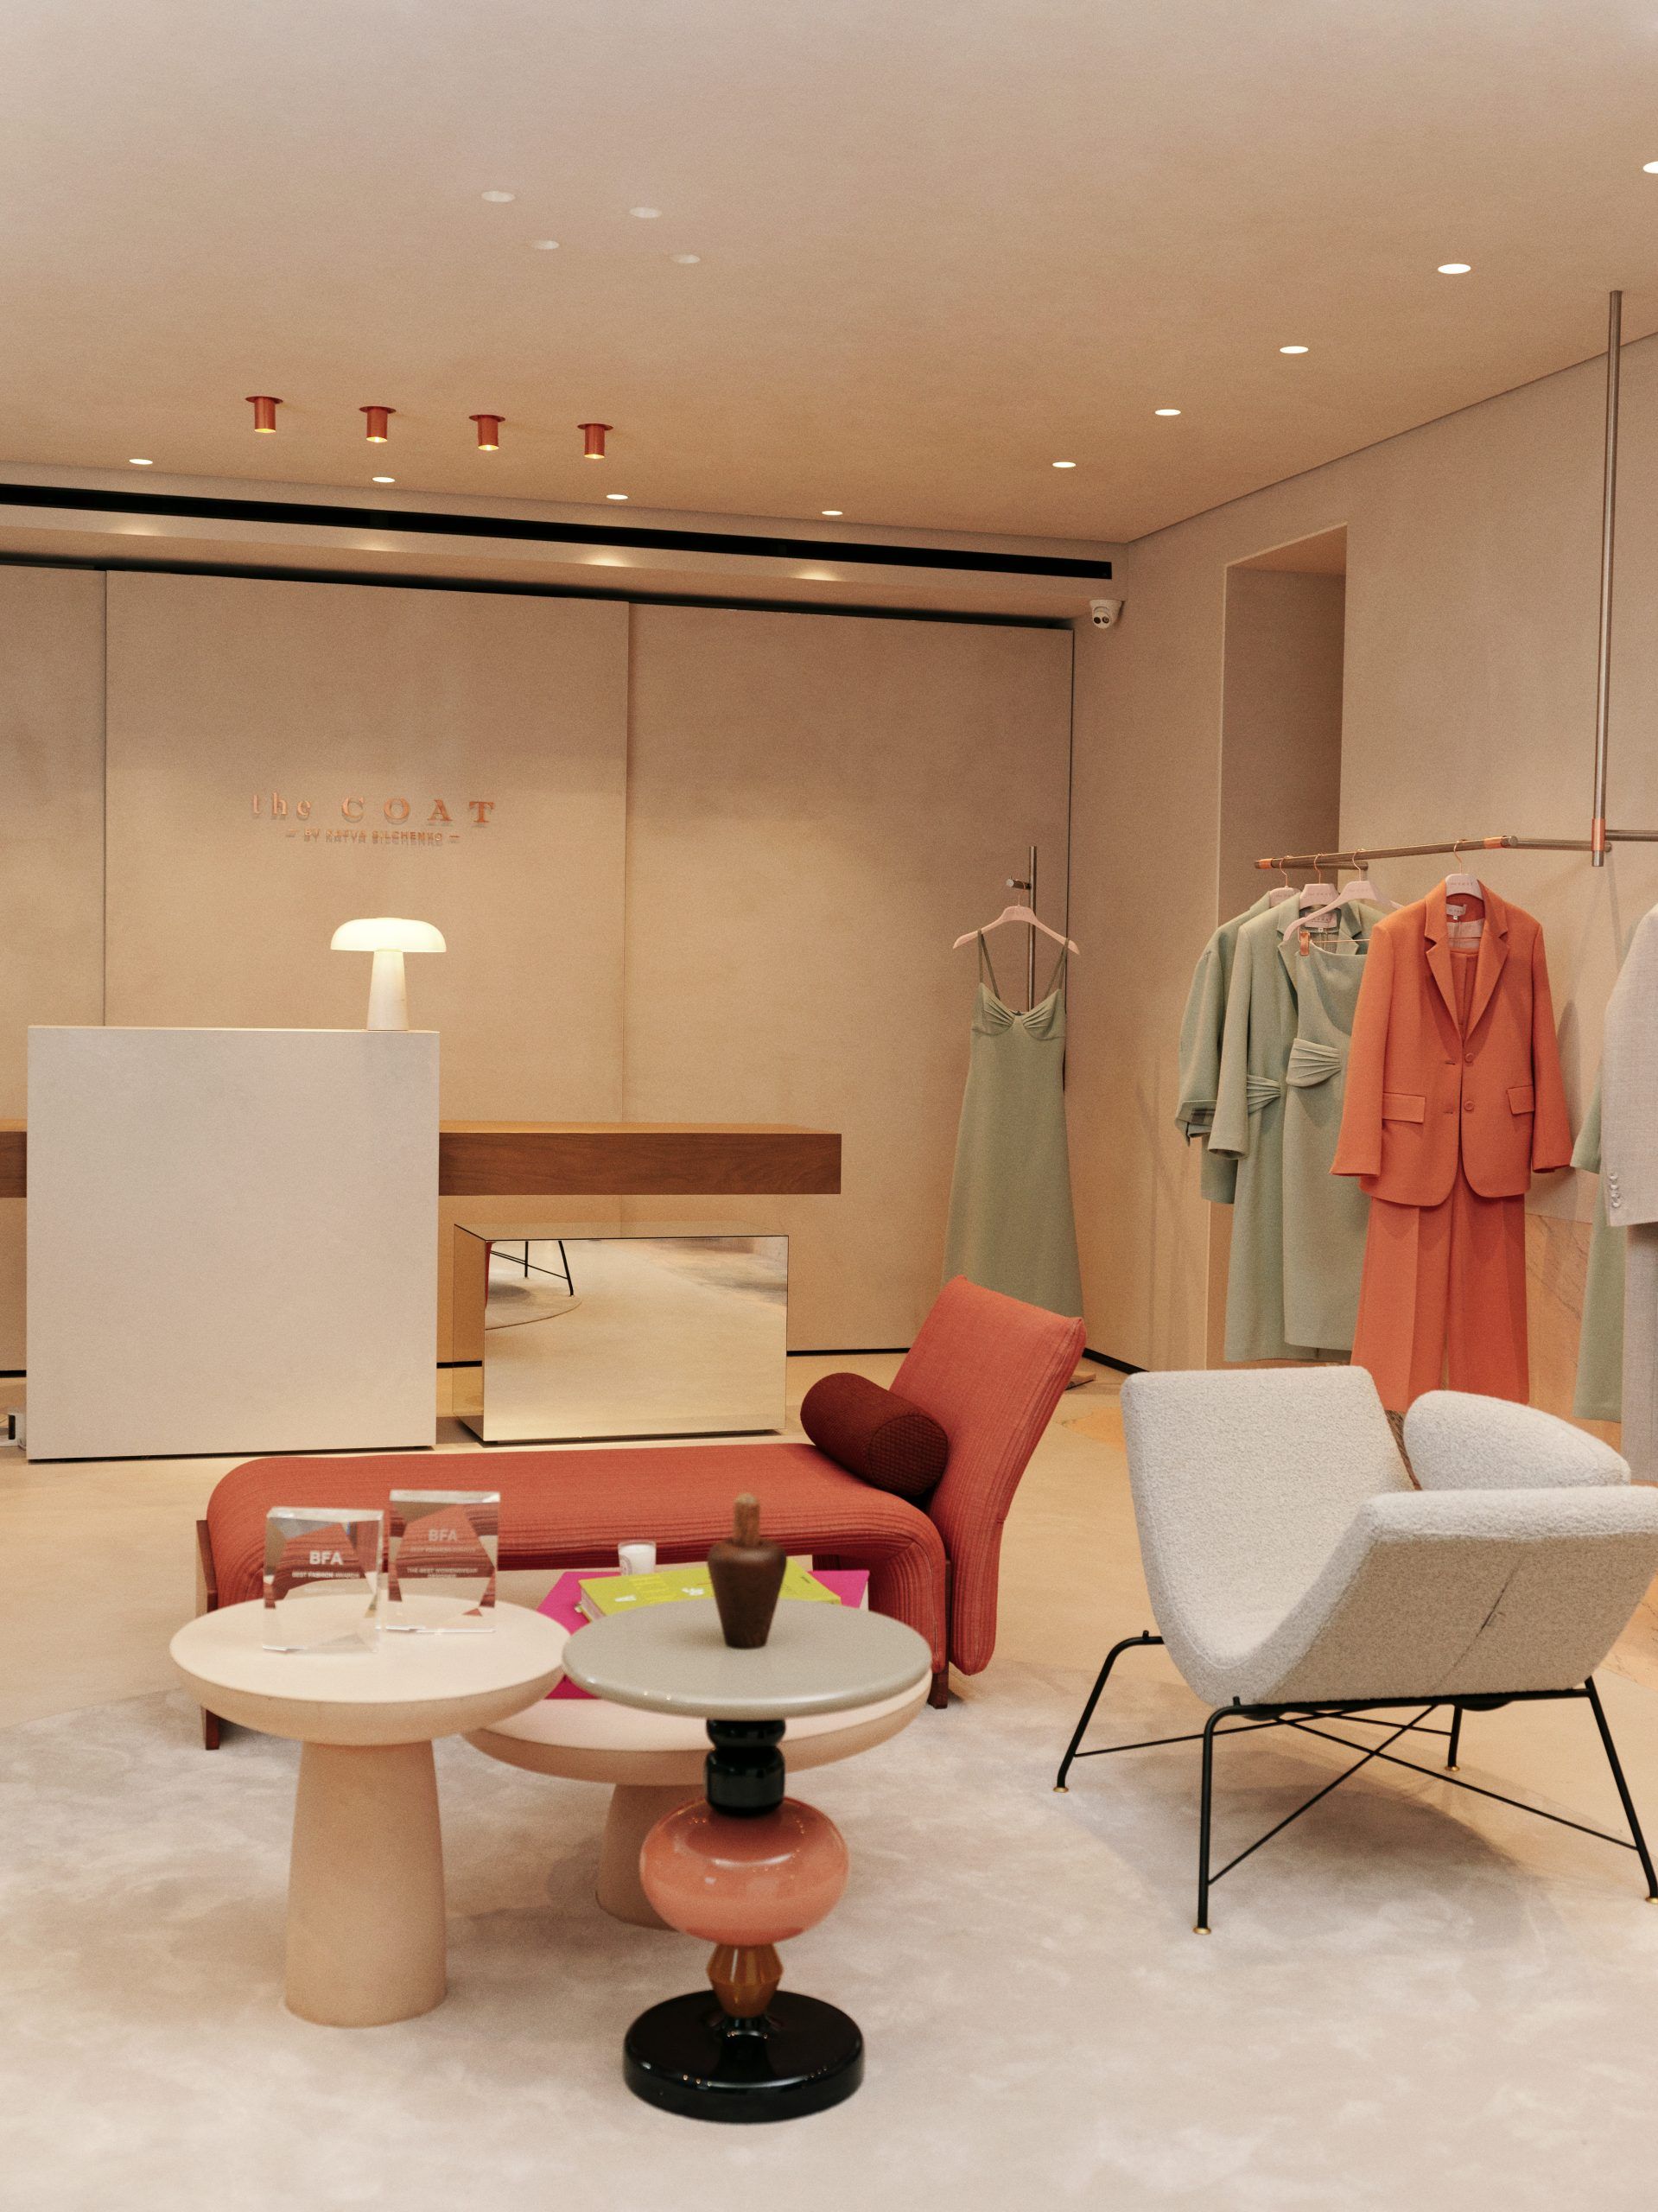 The COAT celebrates its 7th anniversary with a new showroom